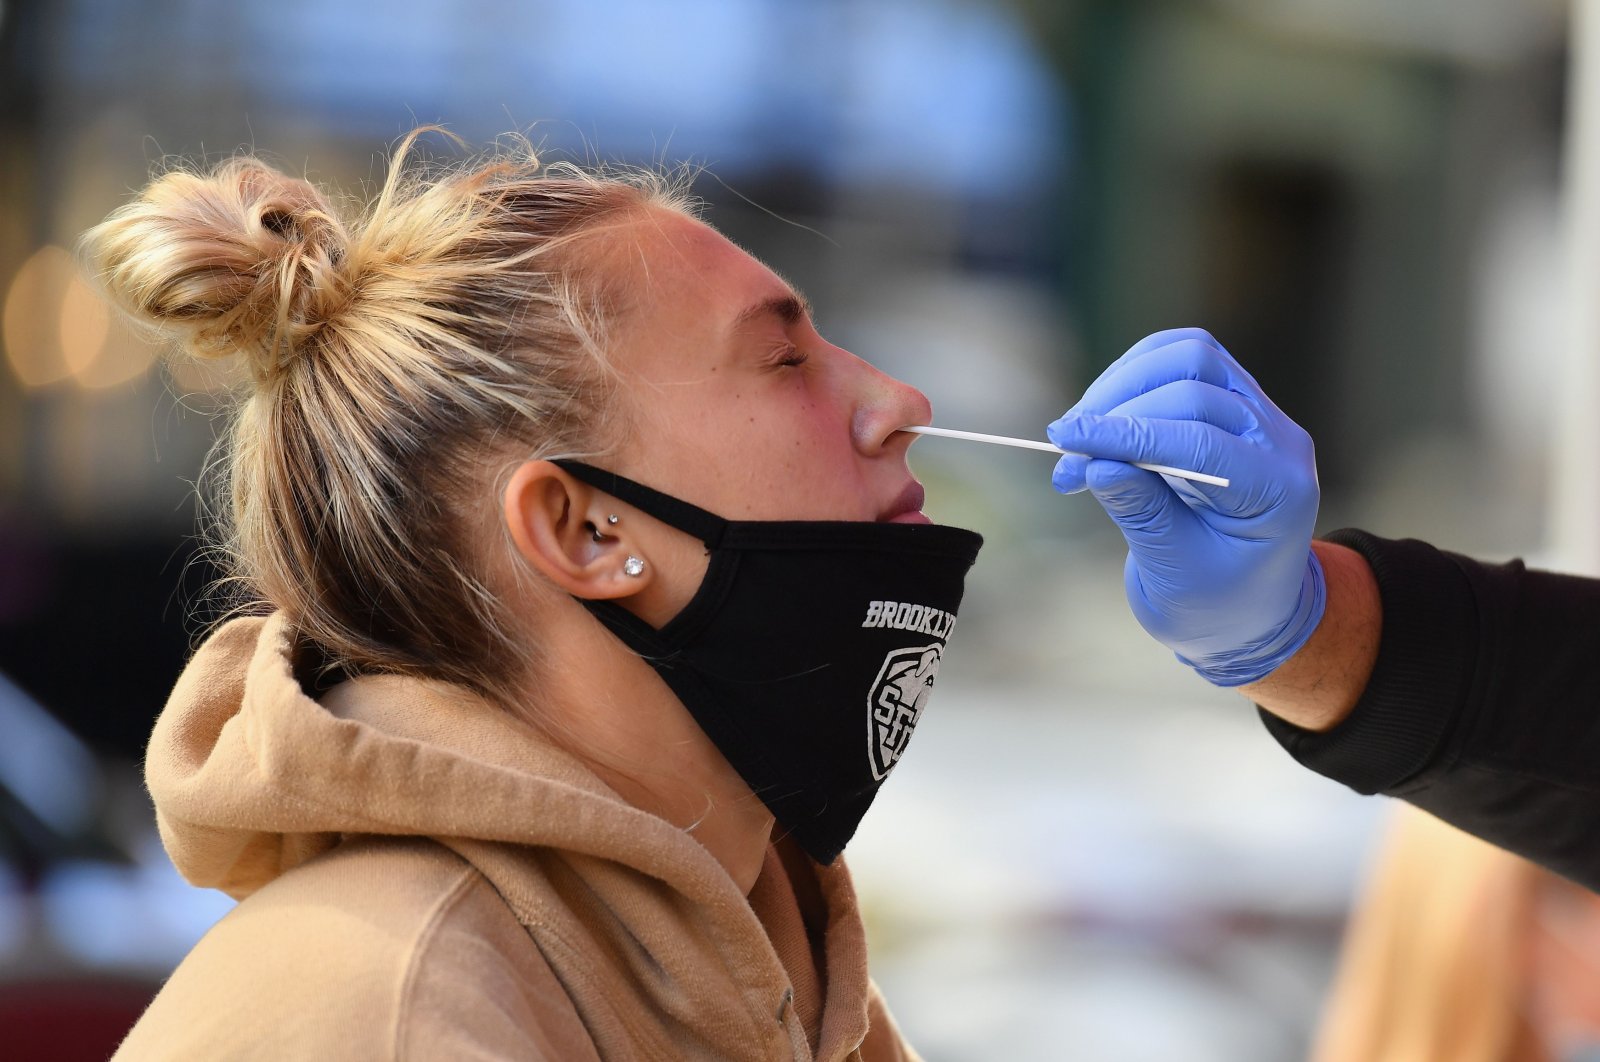 A medical worker takes a nasal swab sample from a student to test for COVID-19 at the Brooklyn Health Medical Alliance urgent care pop-up testing site as infection rates spike in New York City, U.S., Oct. 8, 2020. (AFP Photo)